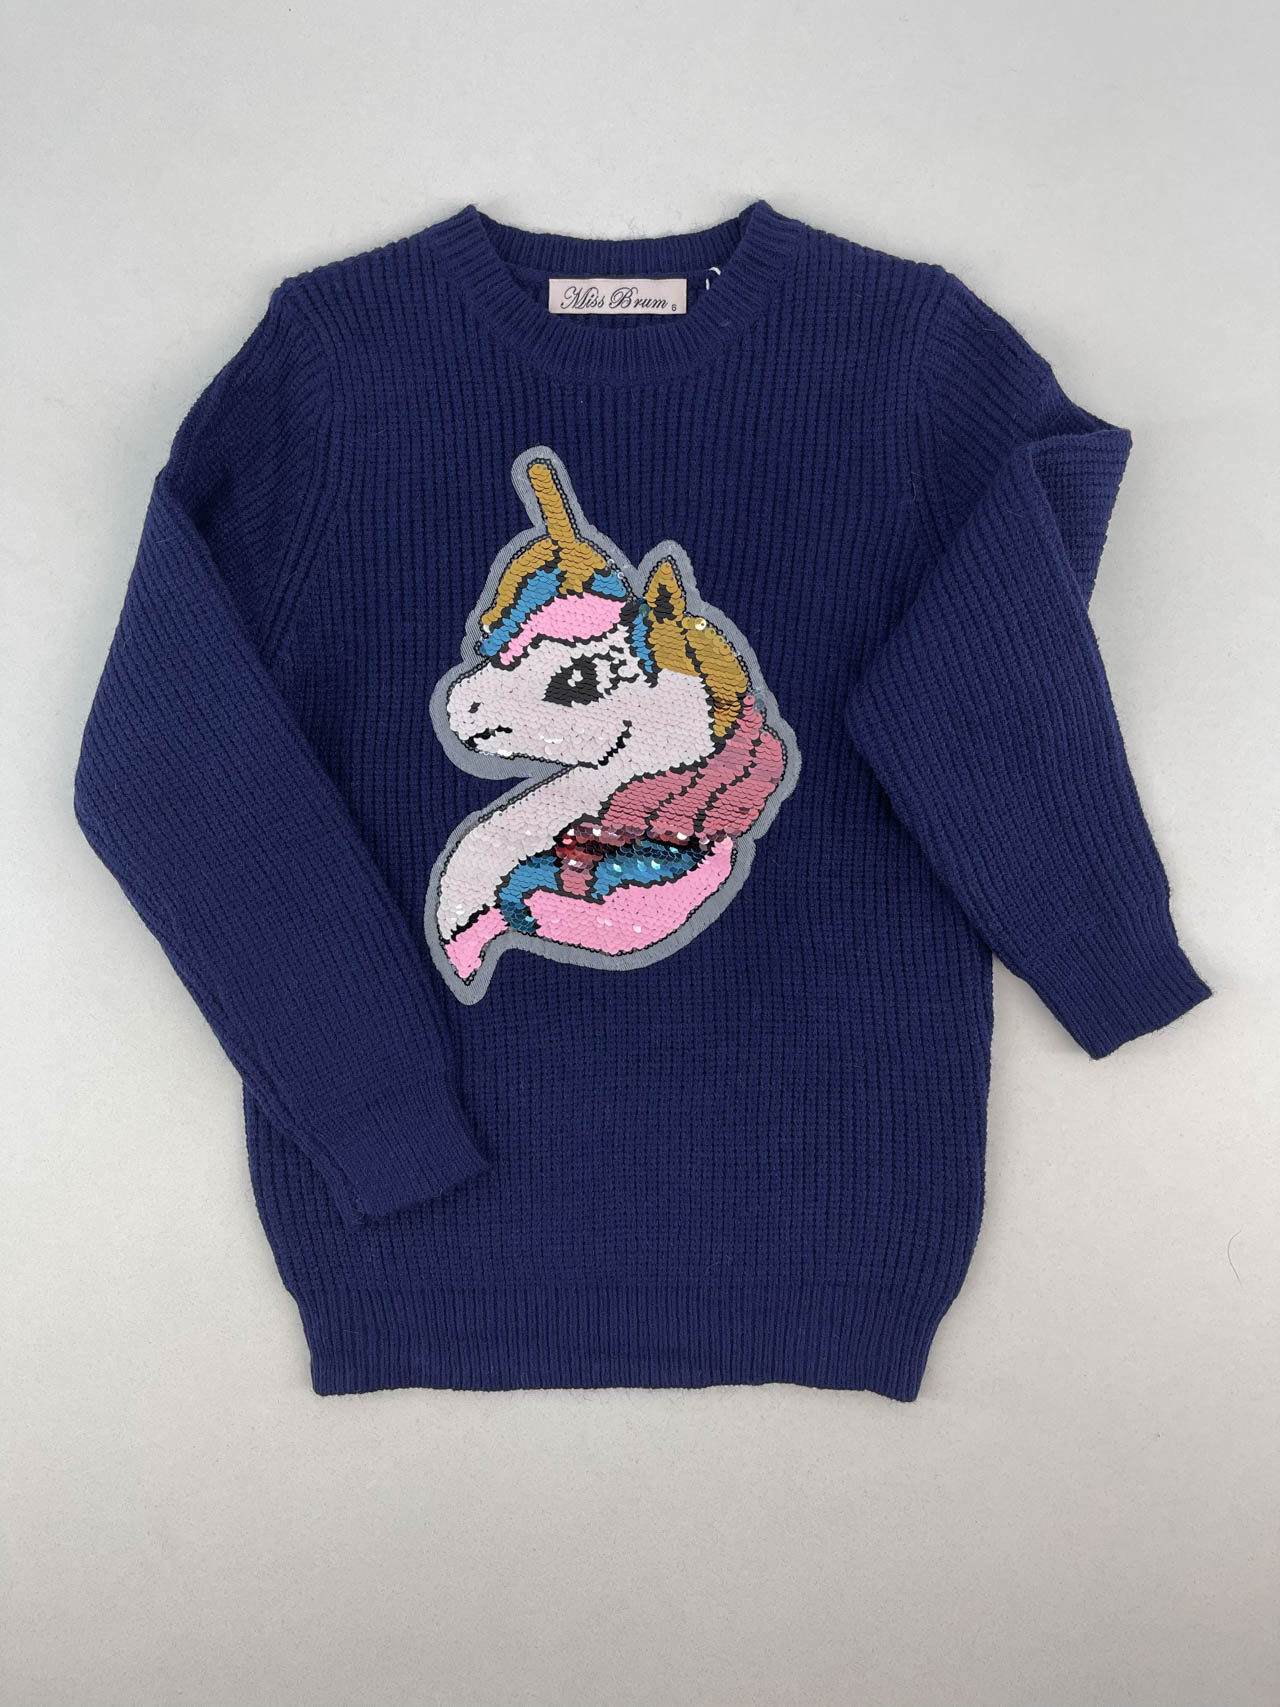 Unicorn knitted blouse girl code A185